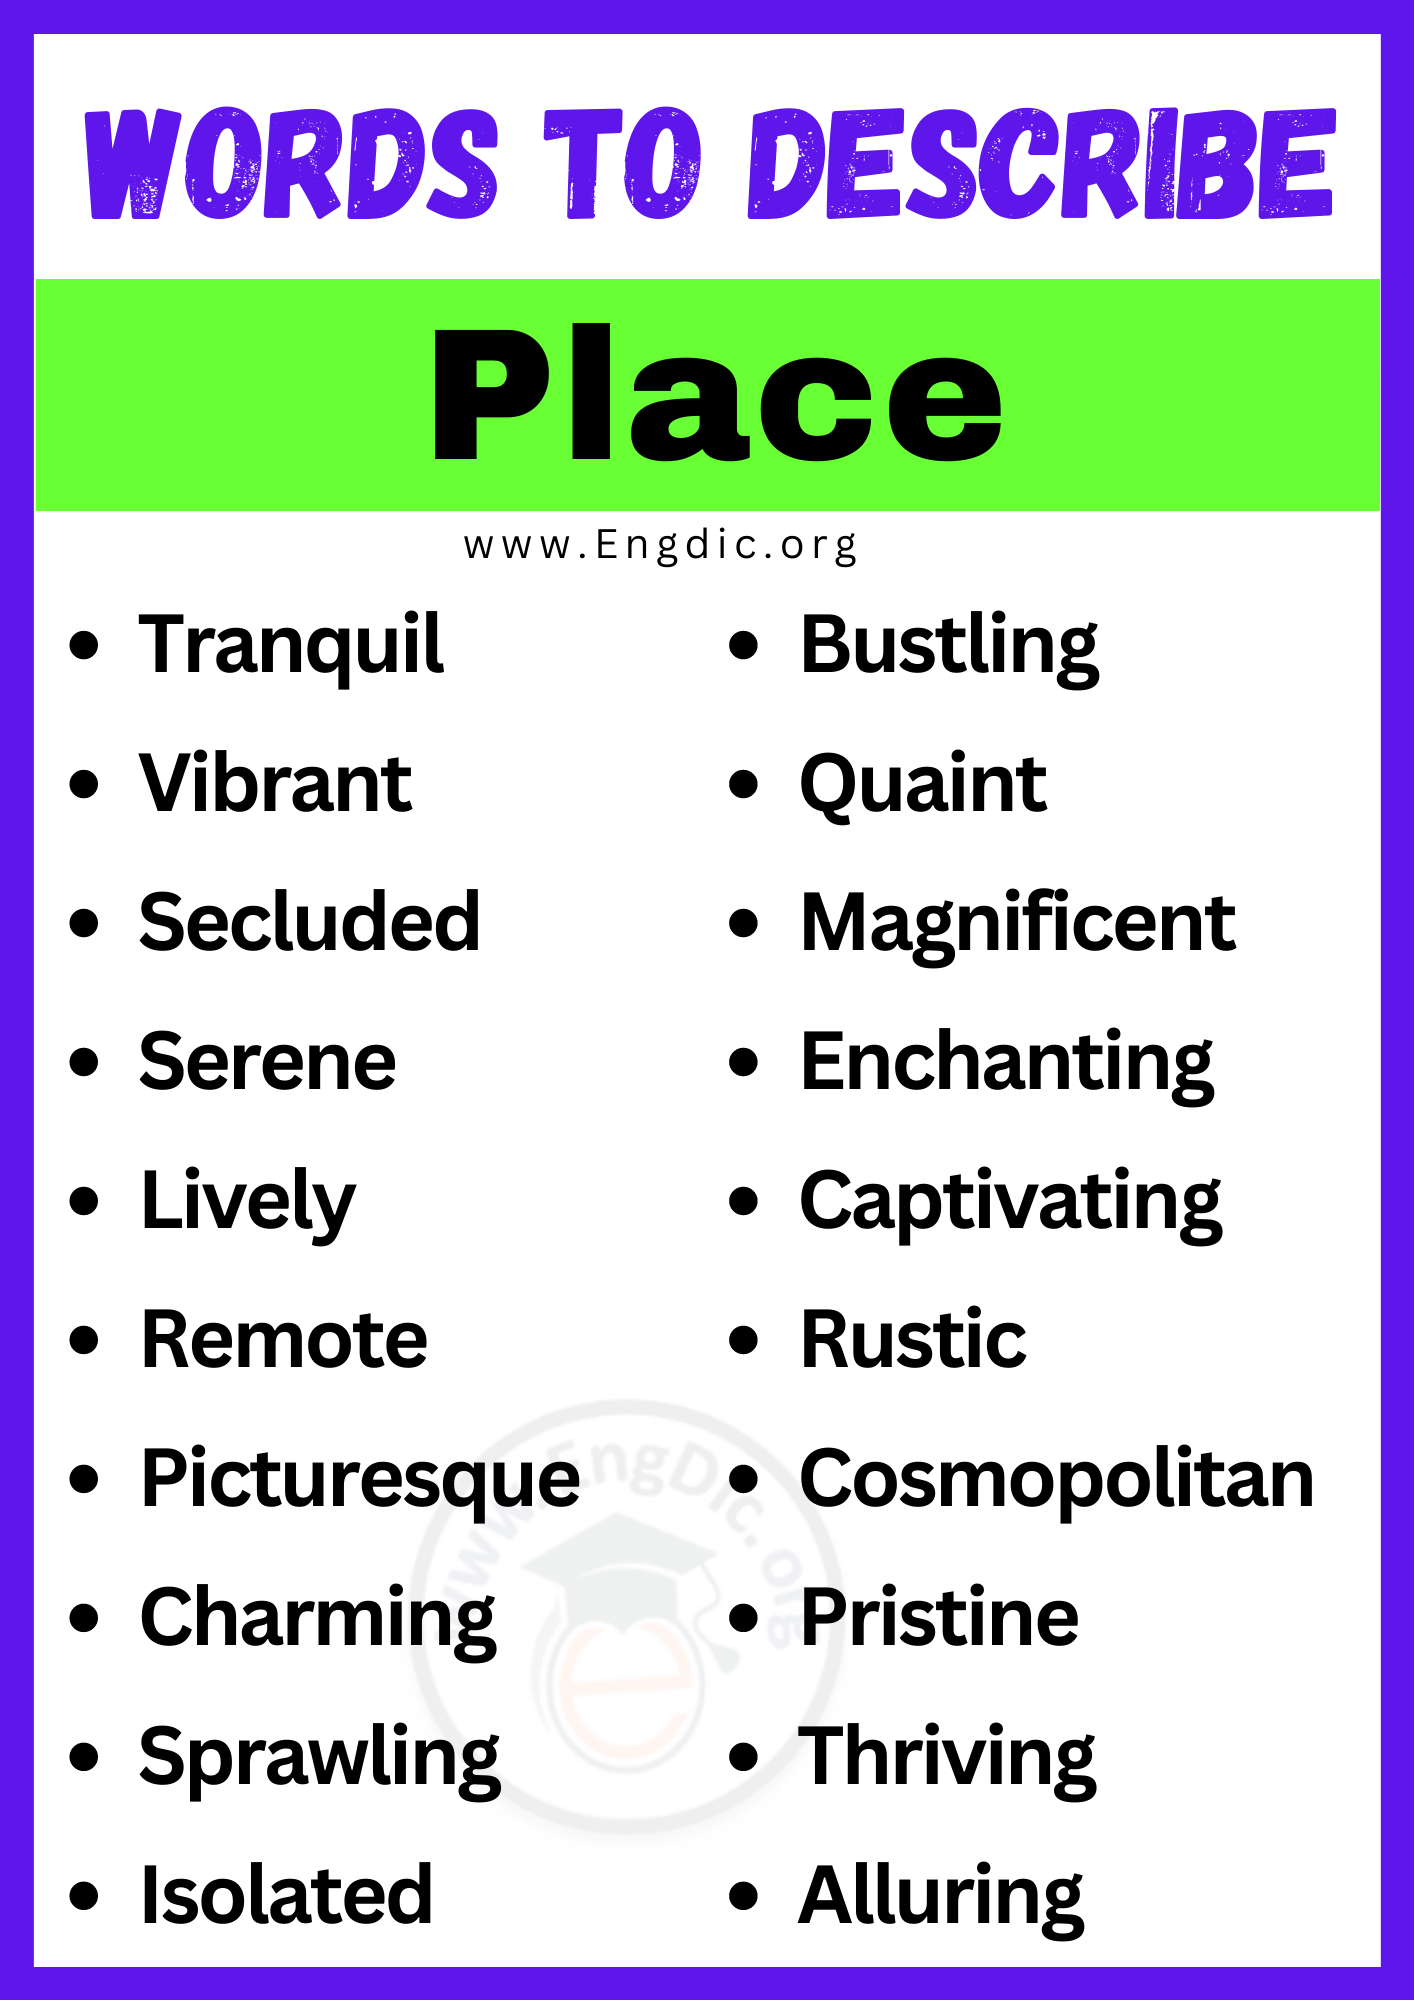 Words to Describe Place